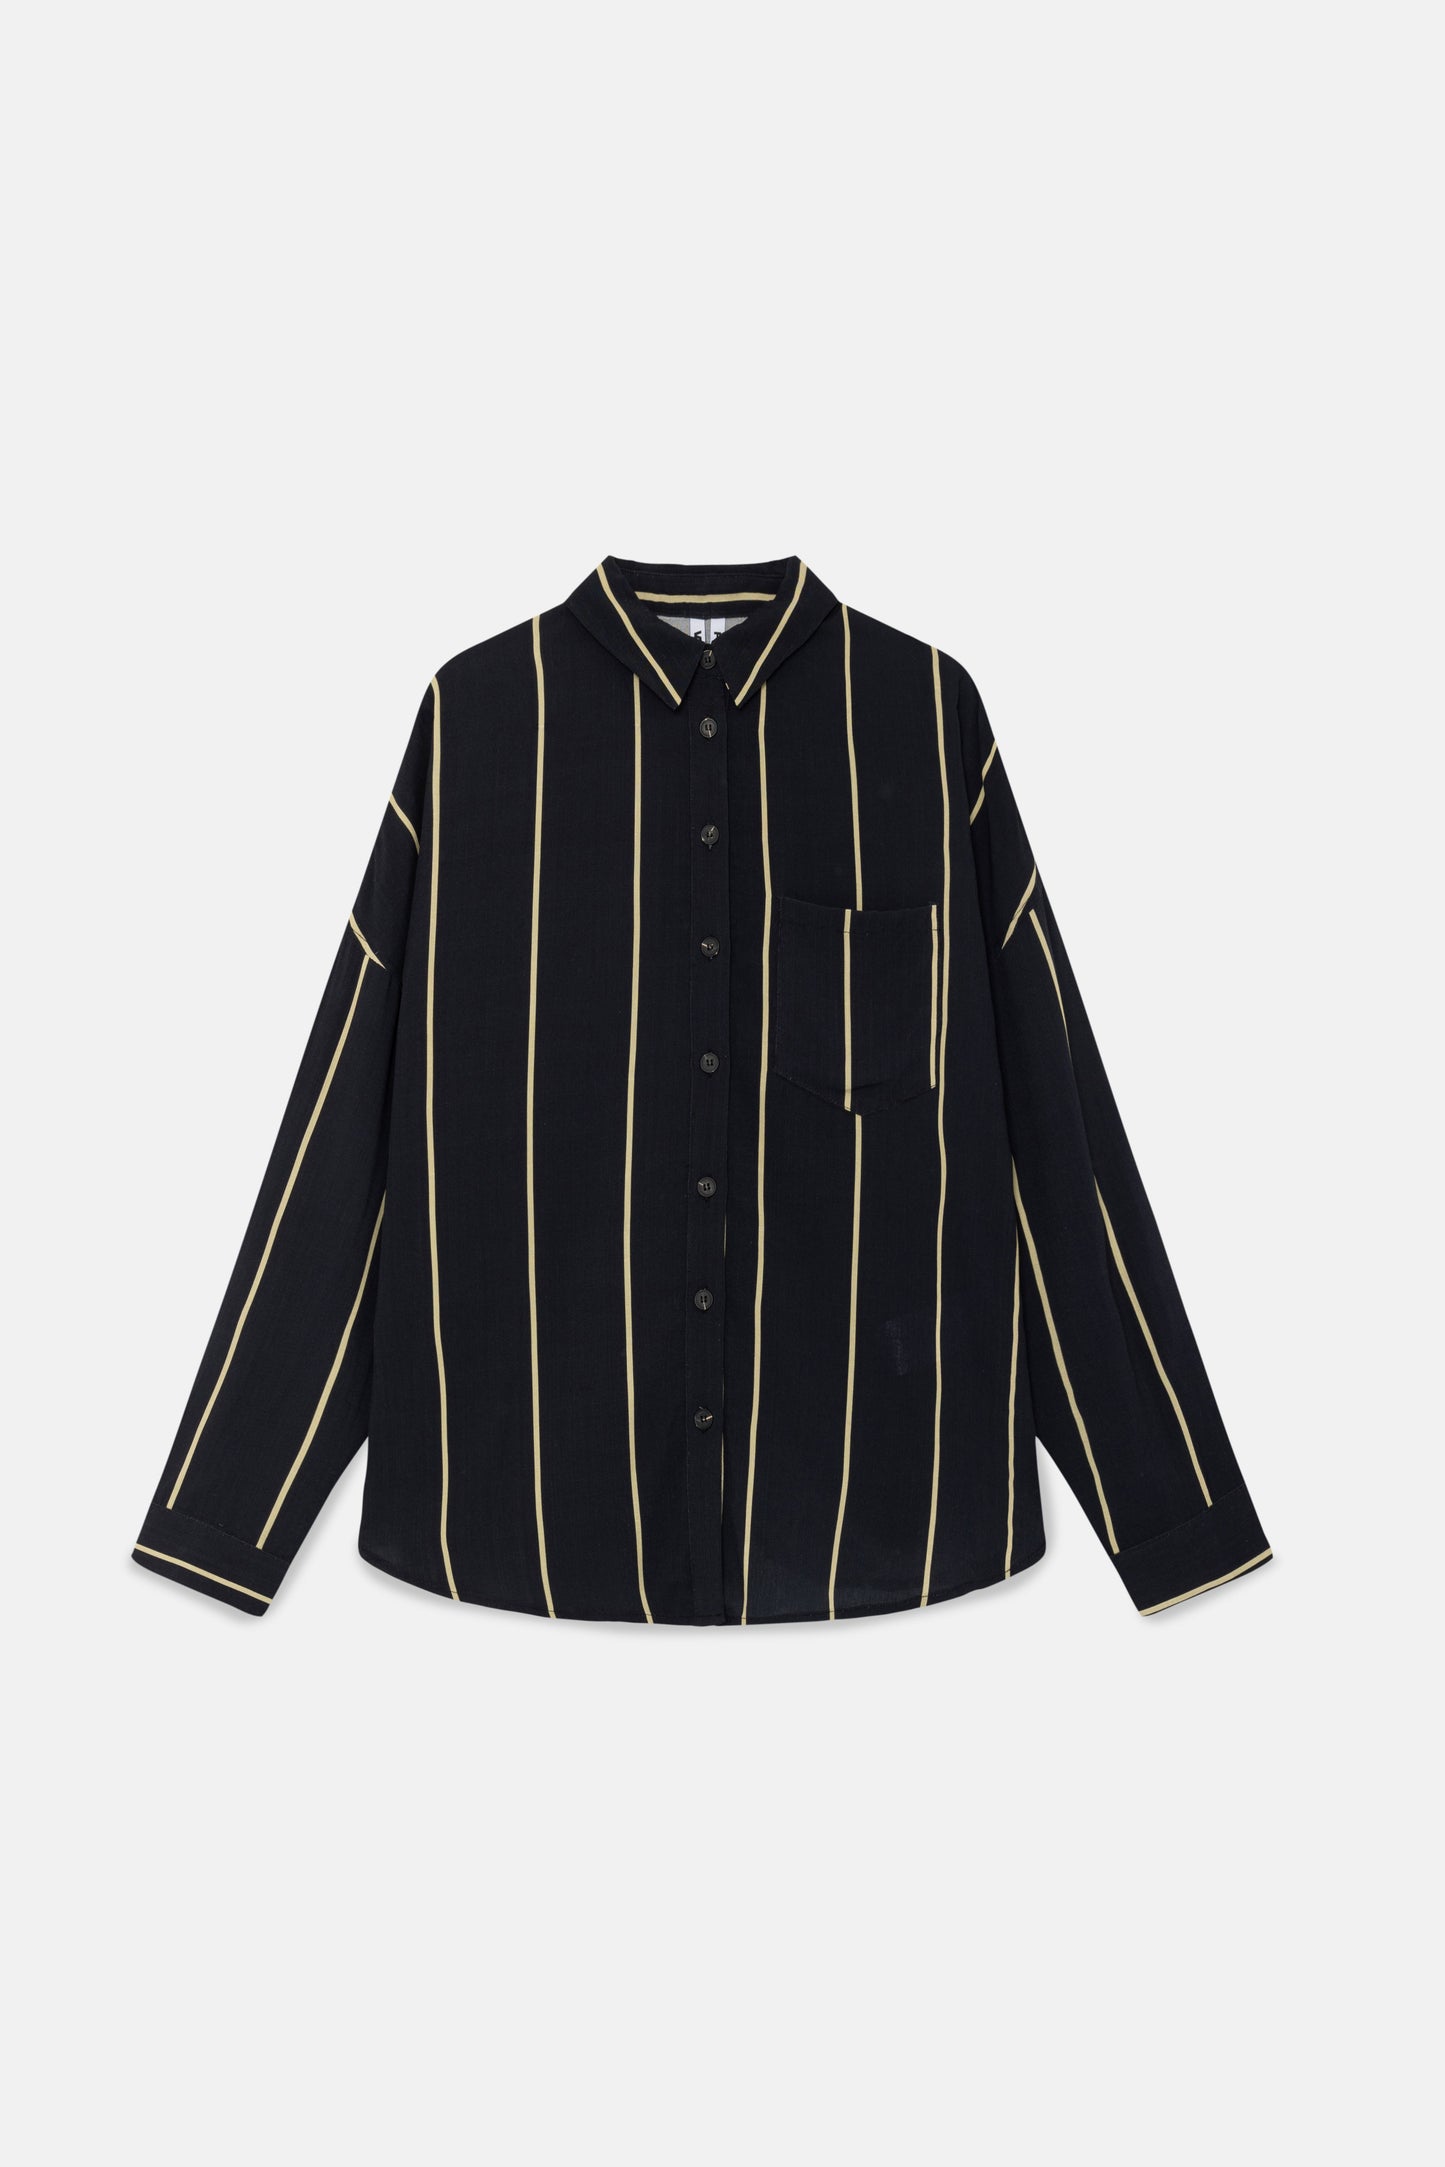 Flowing shirt with black striped print